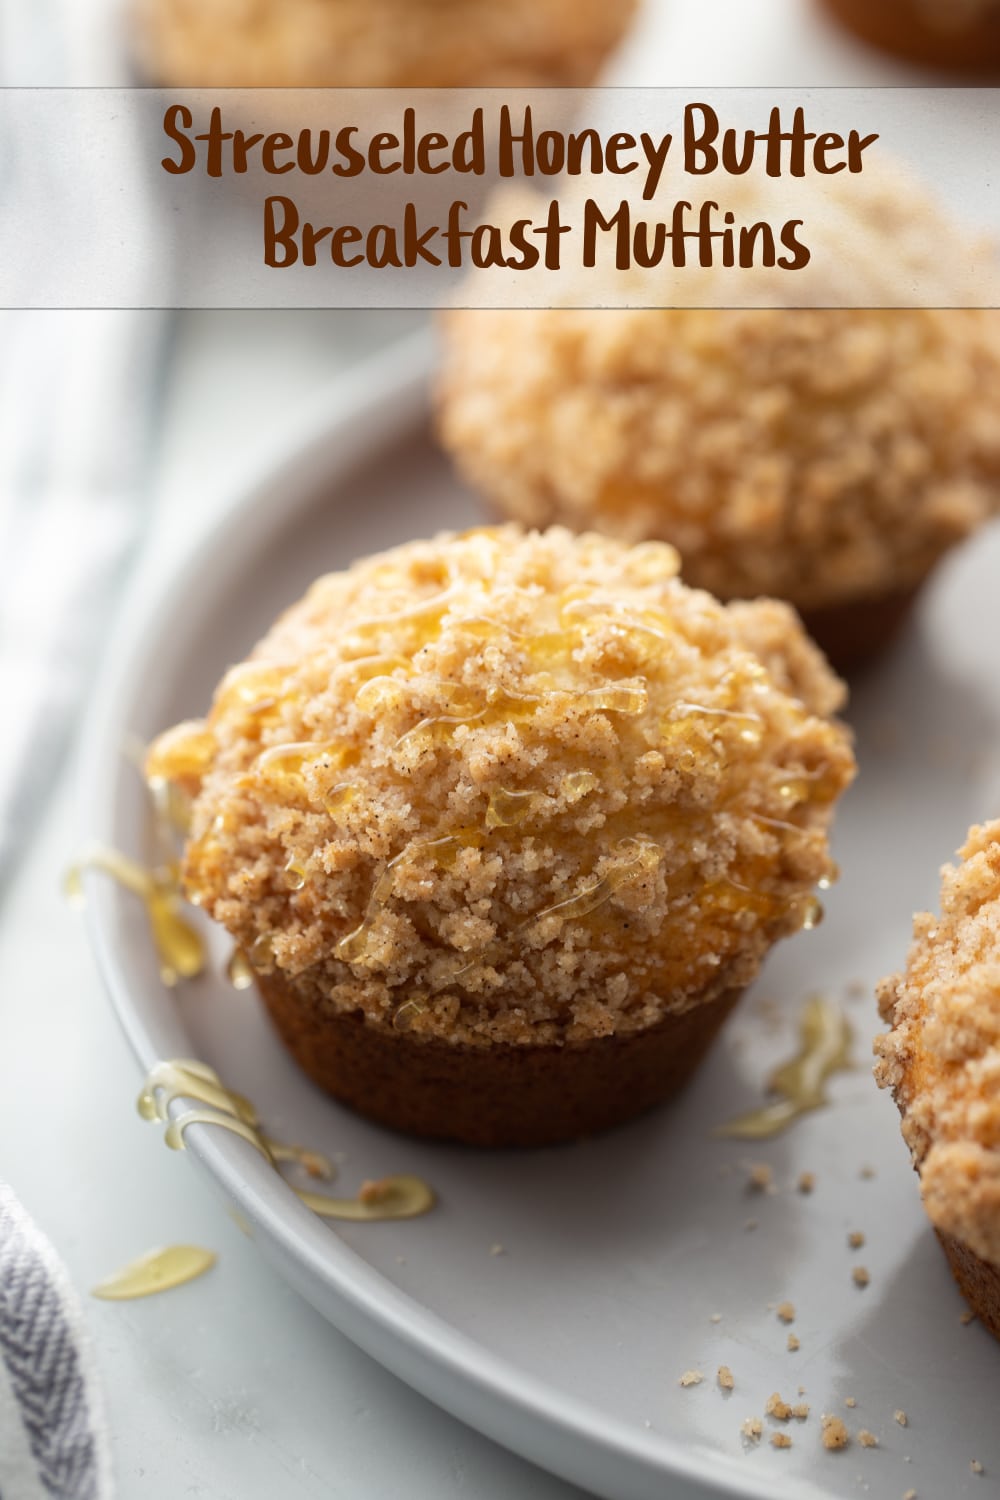 The streusel topping creates contrast to the tender honey butter muffins below, and together make the best crunchy, buttery flavored muffins you could hope for at the breakfast table. via @cmpollak1